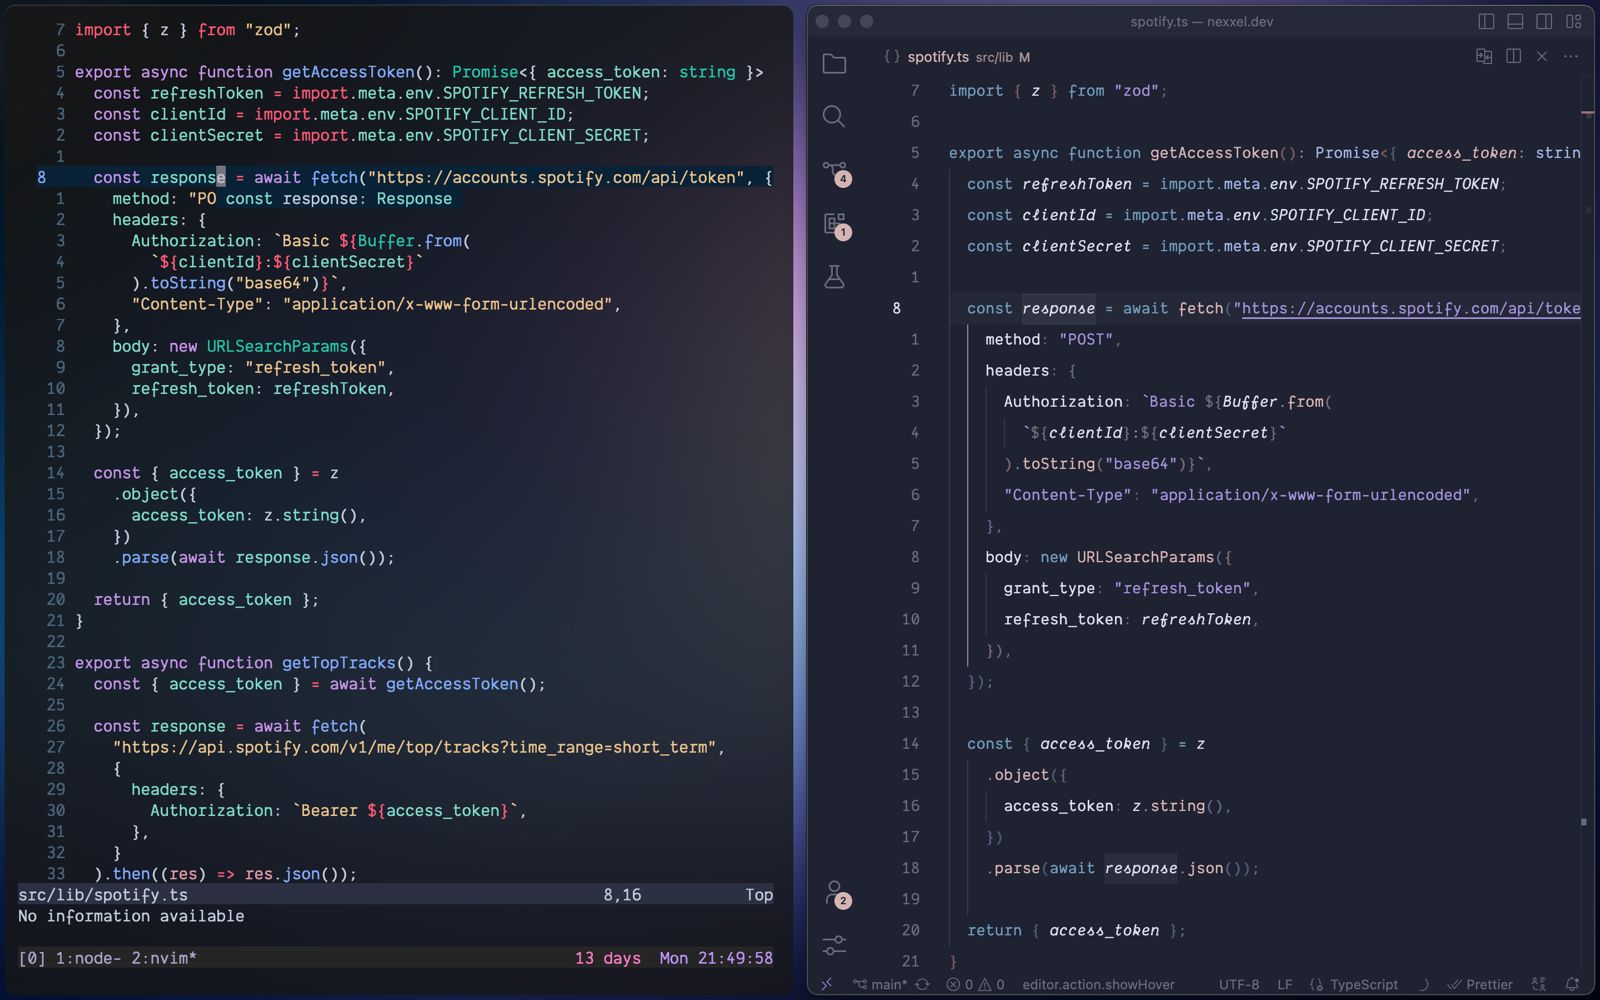 Neovim on the left and VSCode on the right